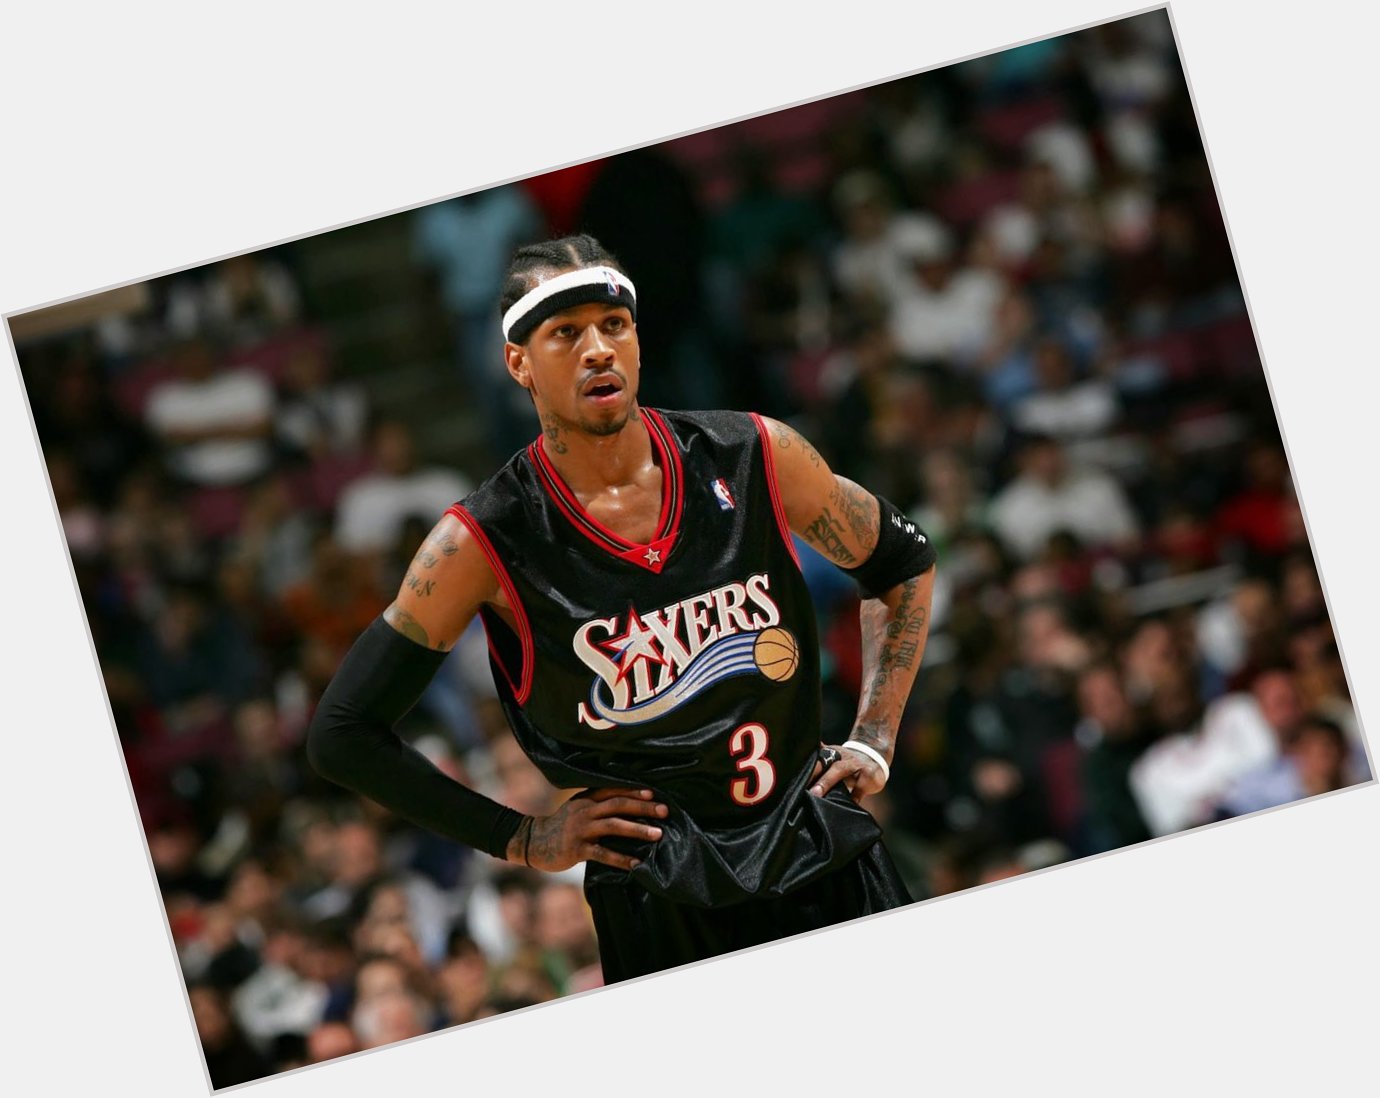 Happy birthday to one of the greatest NBA players of all time. I\m glad I was able to watch Allen Iverson play. 